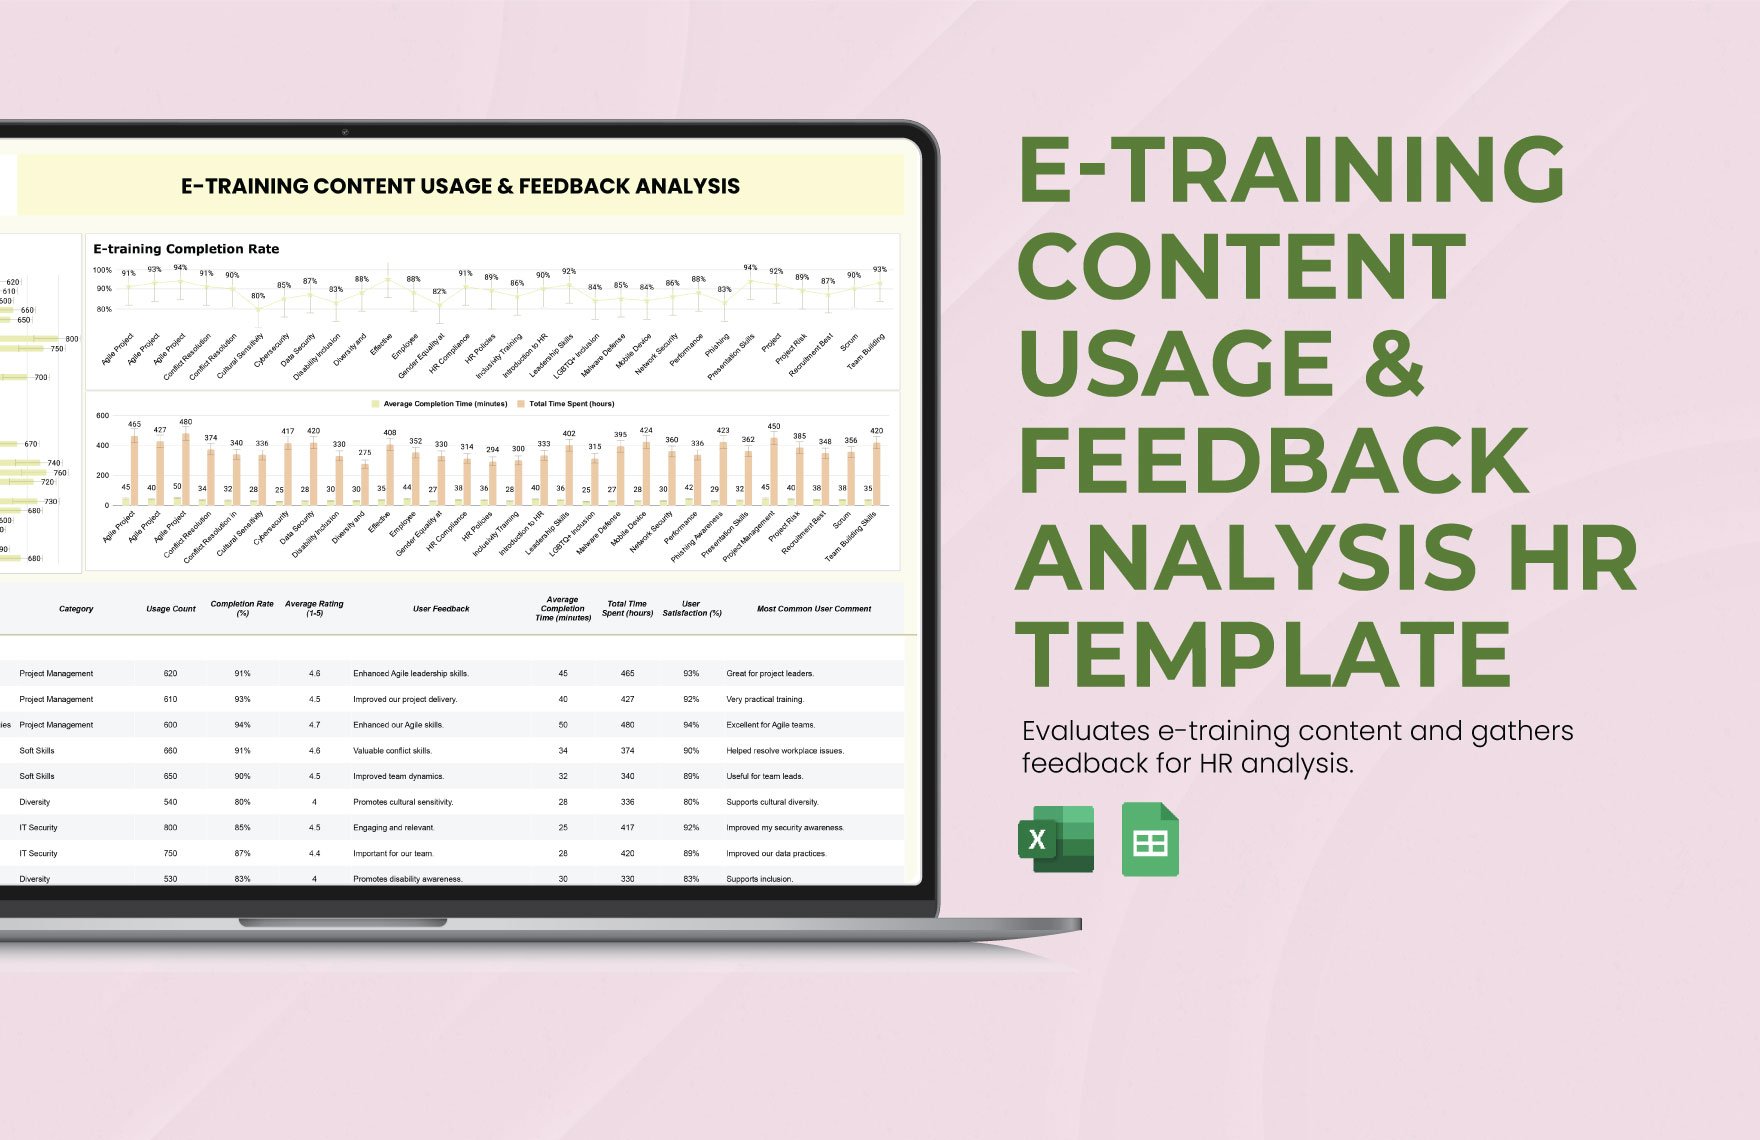 E-training Content Usage & Feedback Analysis HR Template